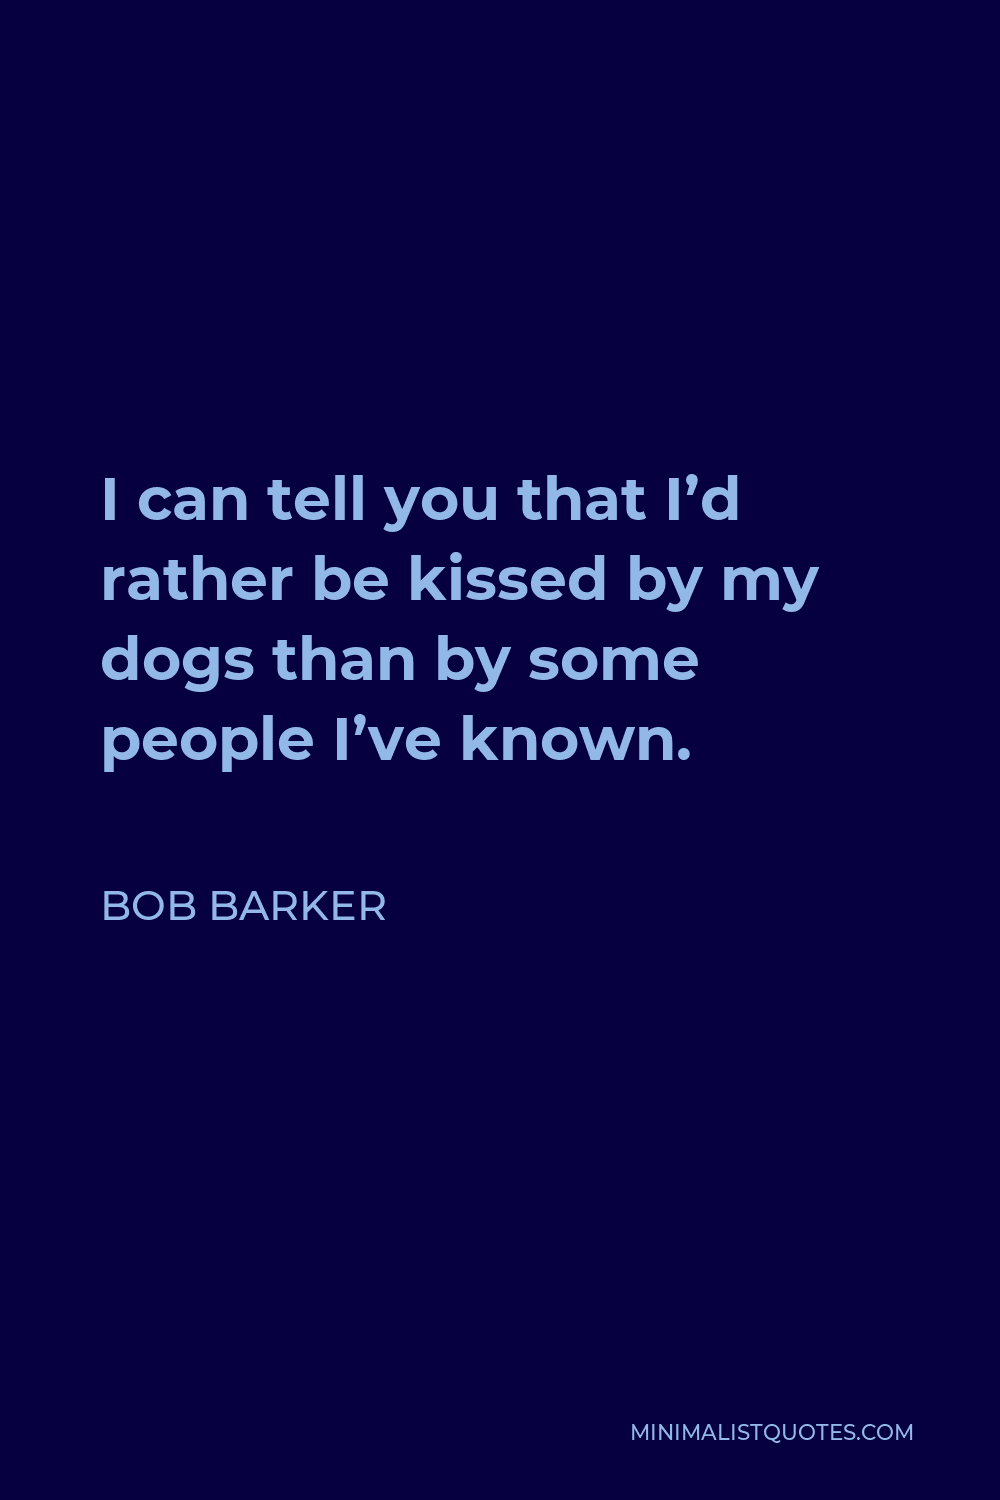 Bob Barker Quote - I can tell you that I’d rather be kissed by my dogs than by some people I’ve known.